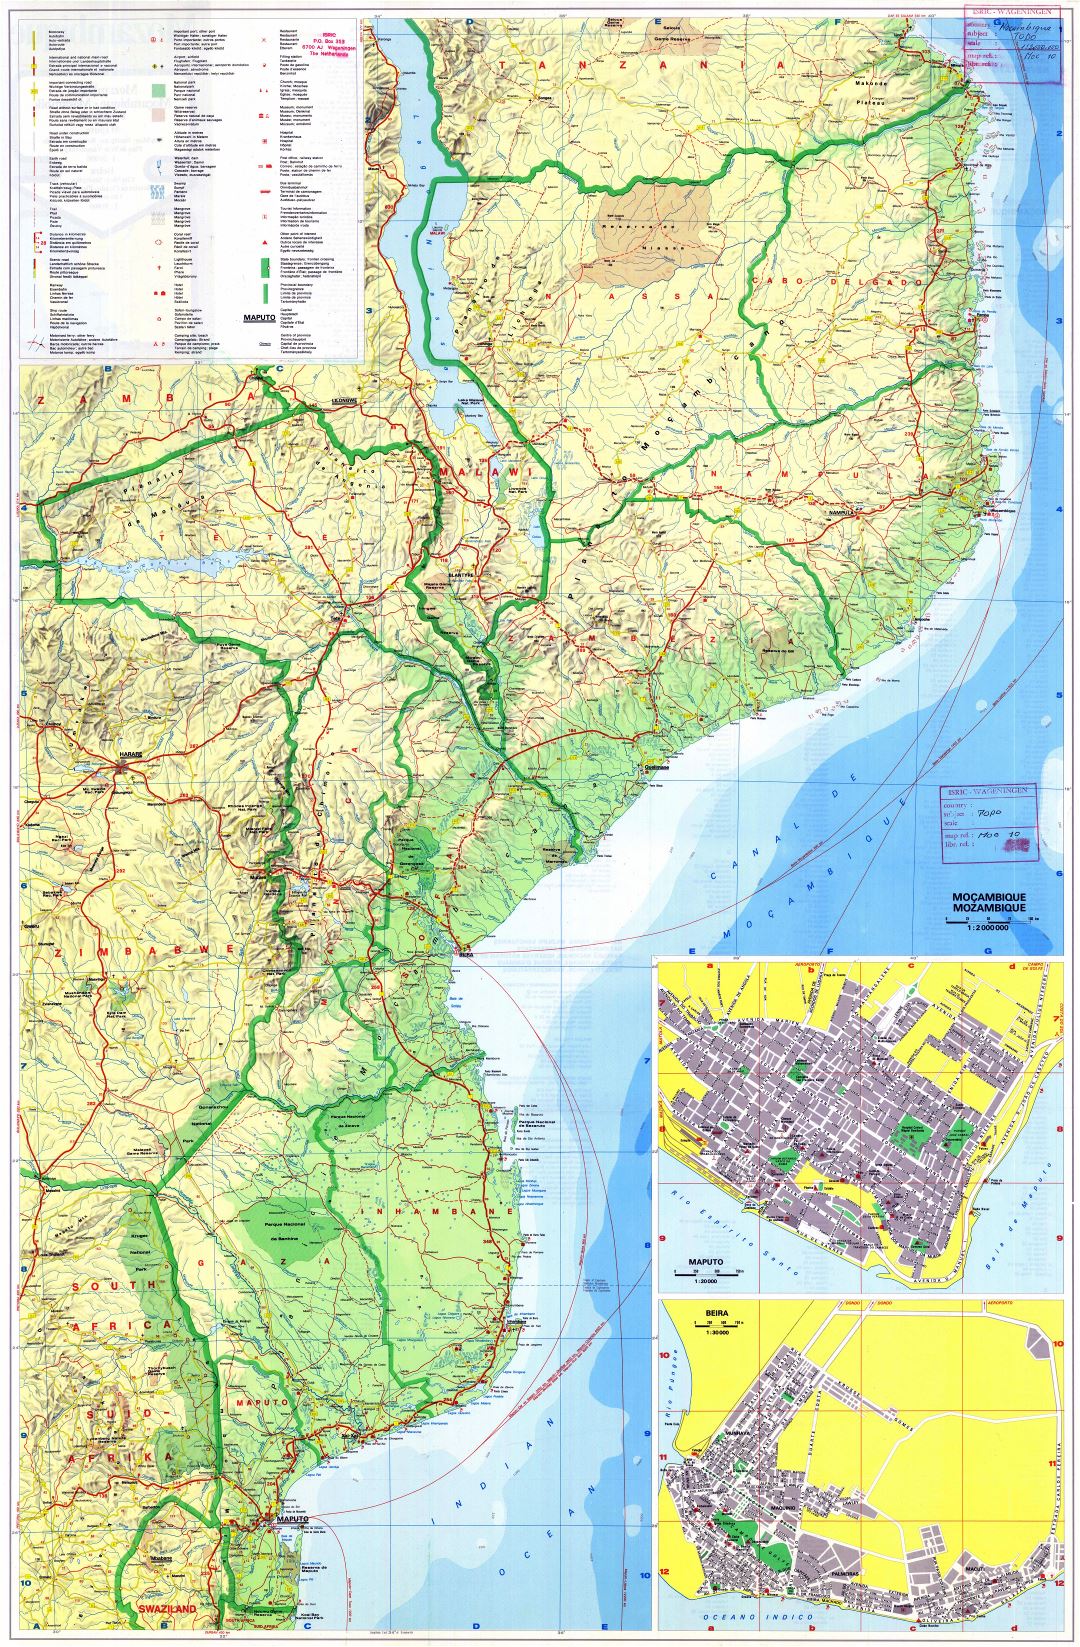 Large scale detailed map of Mozambique